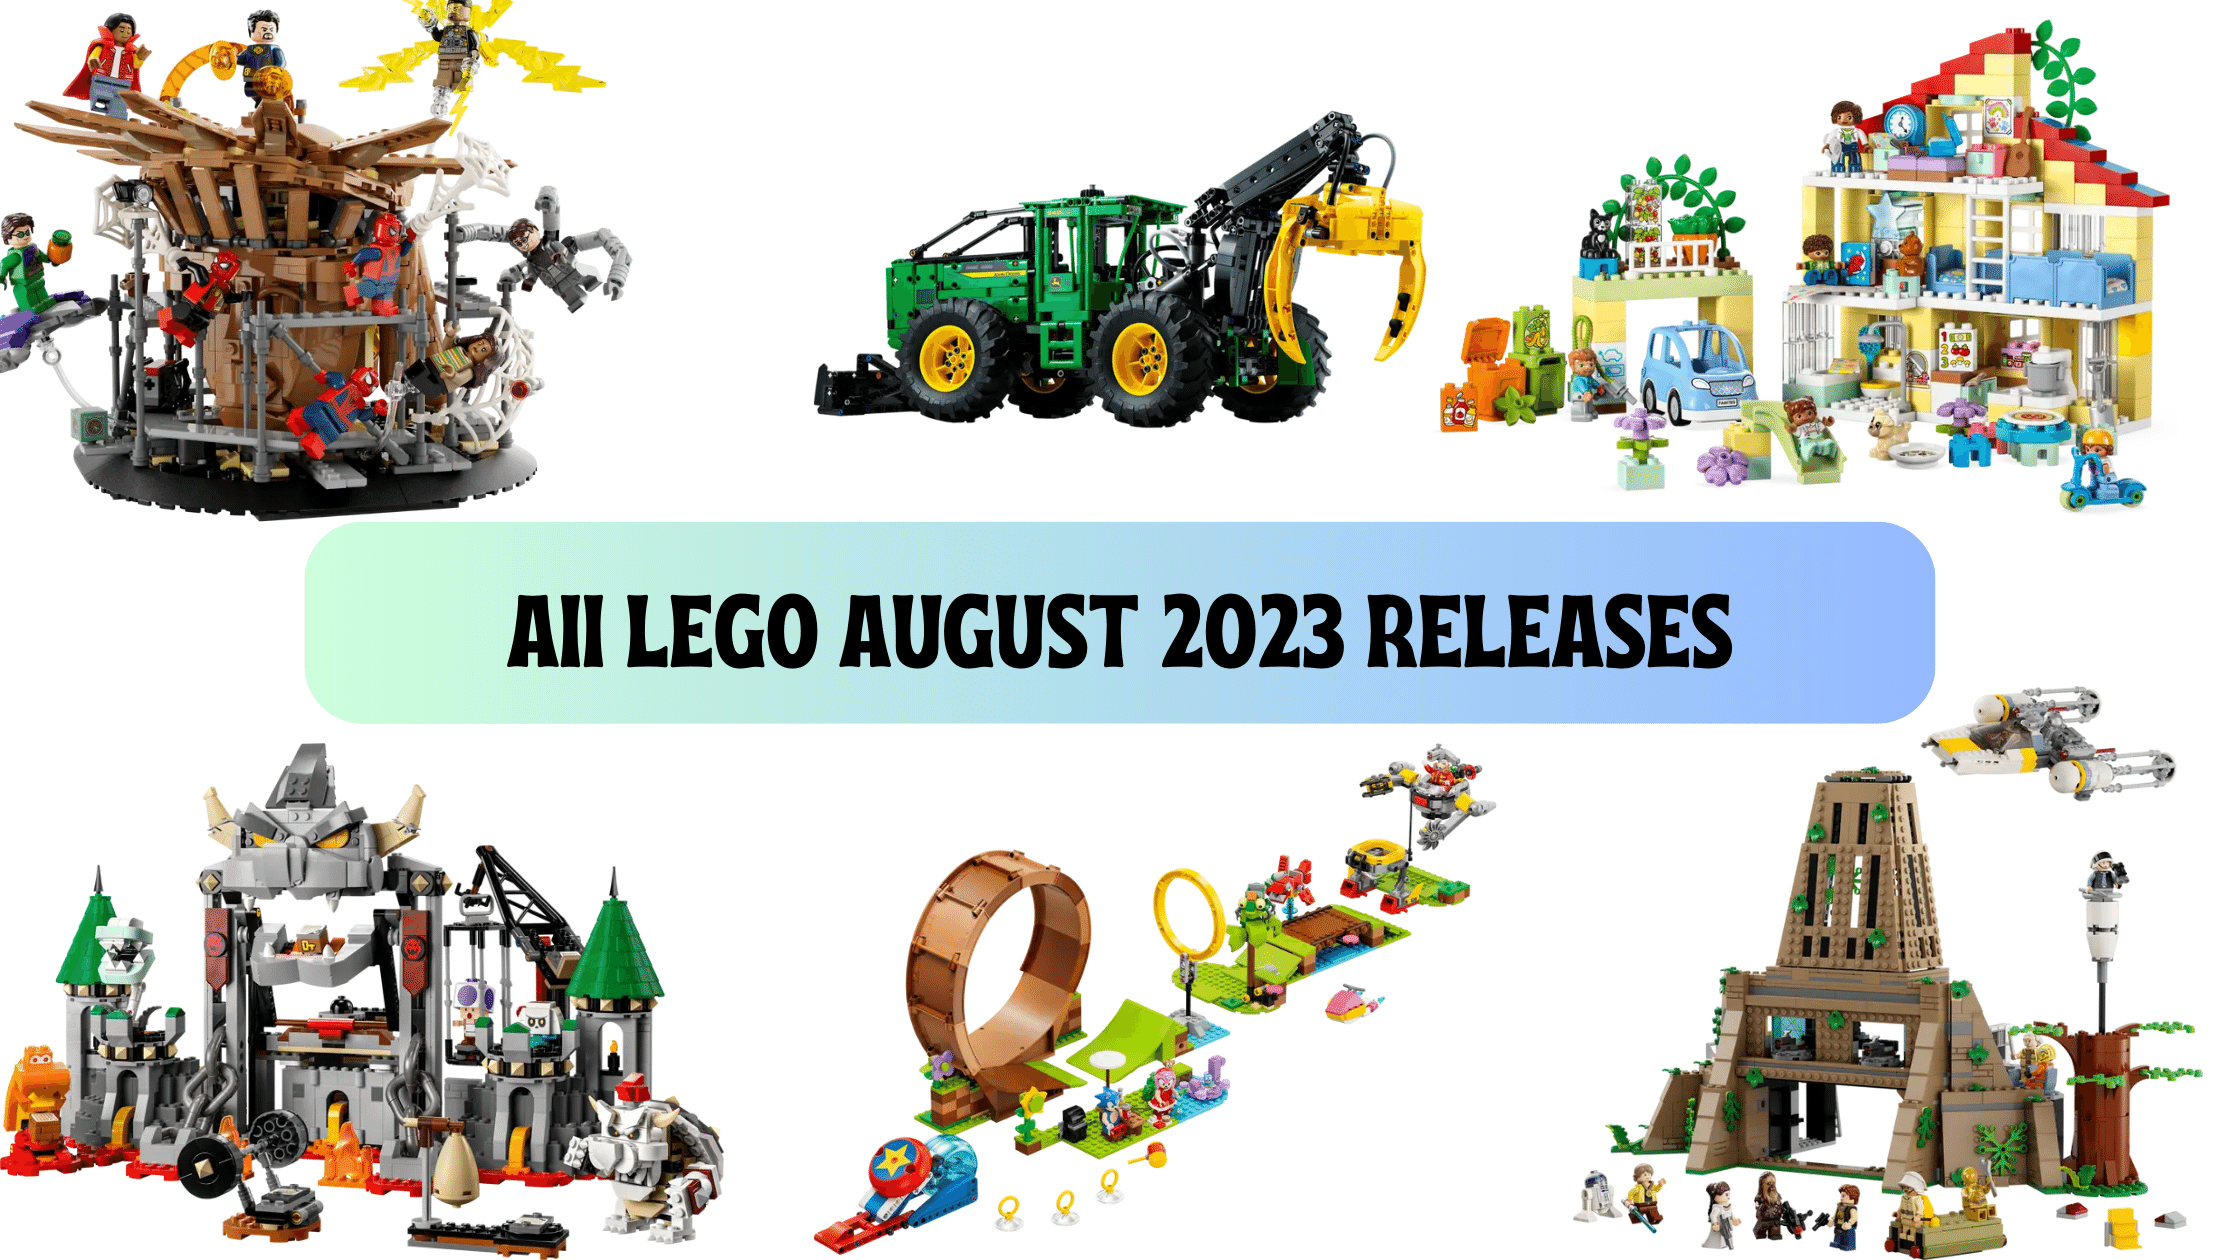 LEGO August 2023 Releases